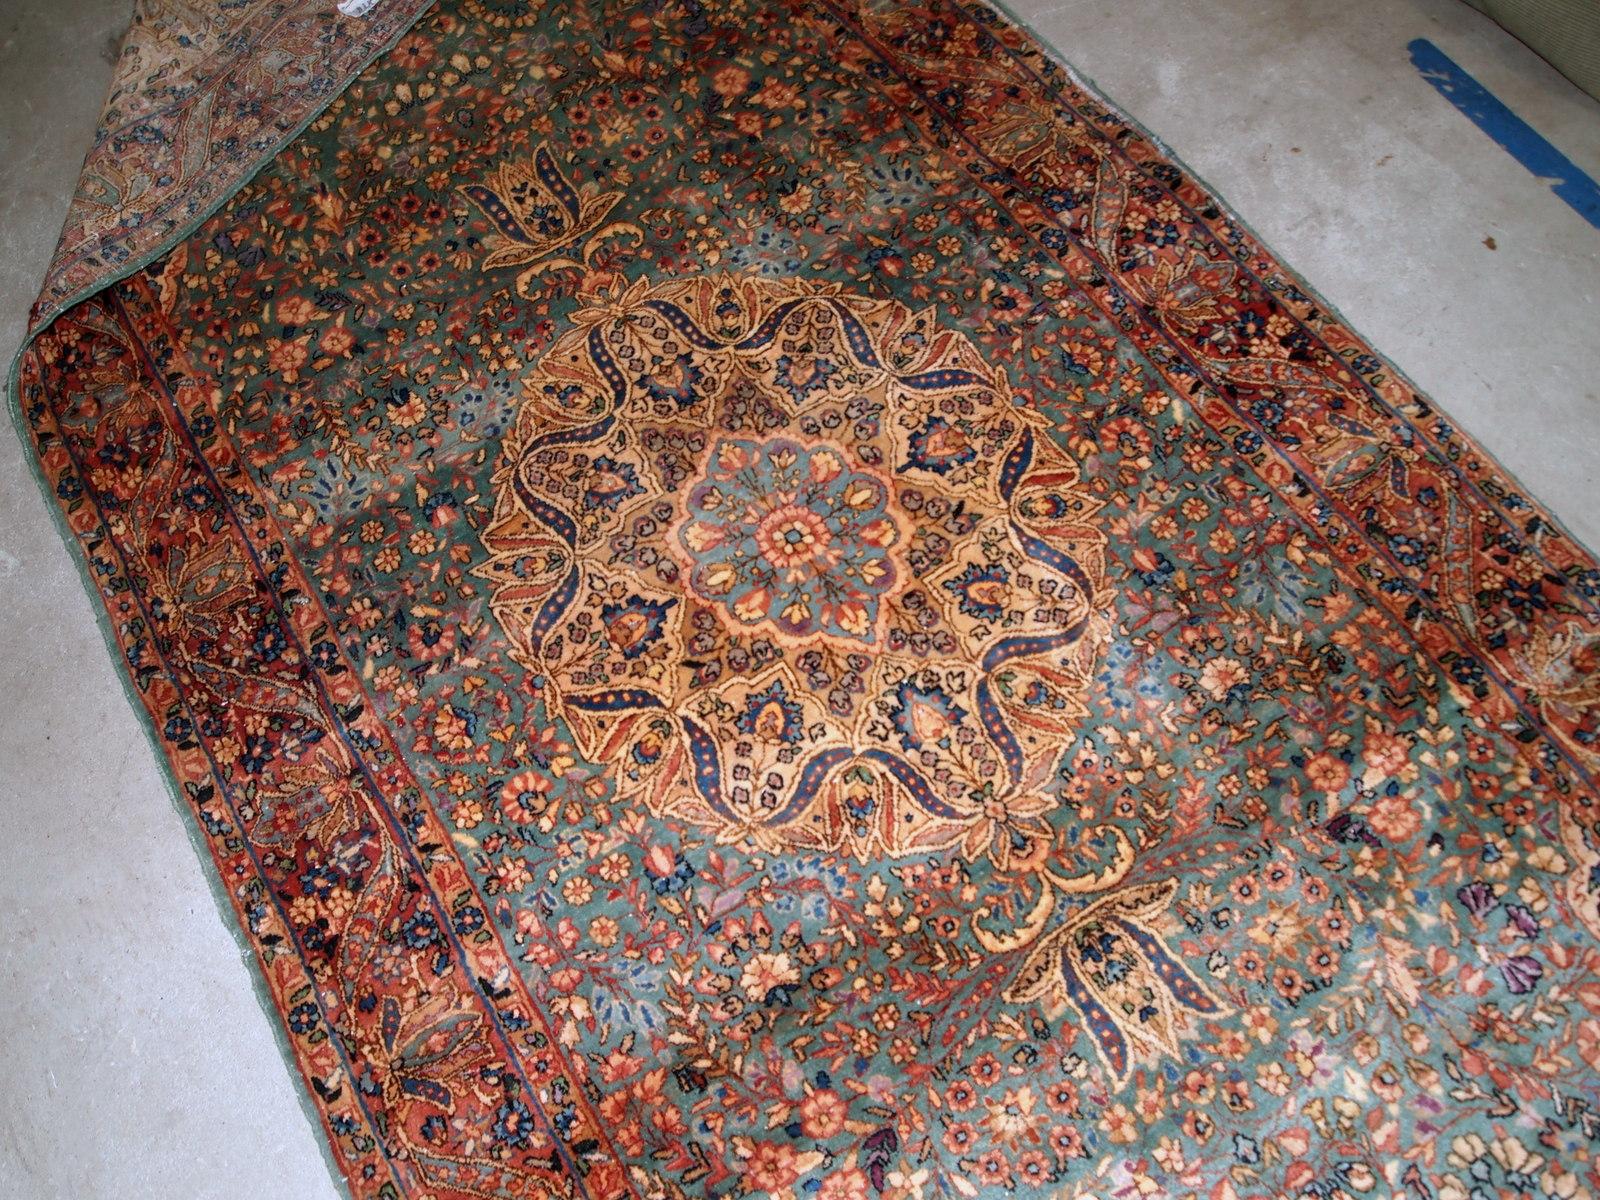 Handmade antique Kerman rug in original good condition. The rug has been made in the beginning of 20th century in sea green/blue wool.

- Condition: original good,

- circa 1920s,

- Size: 3.10' x 9' (120cm x 274cm),

- Material: wool,

-